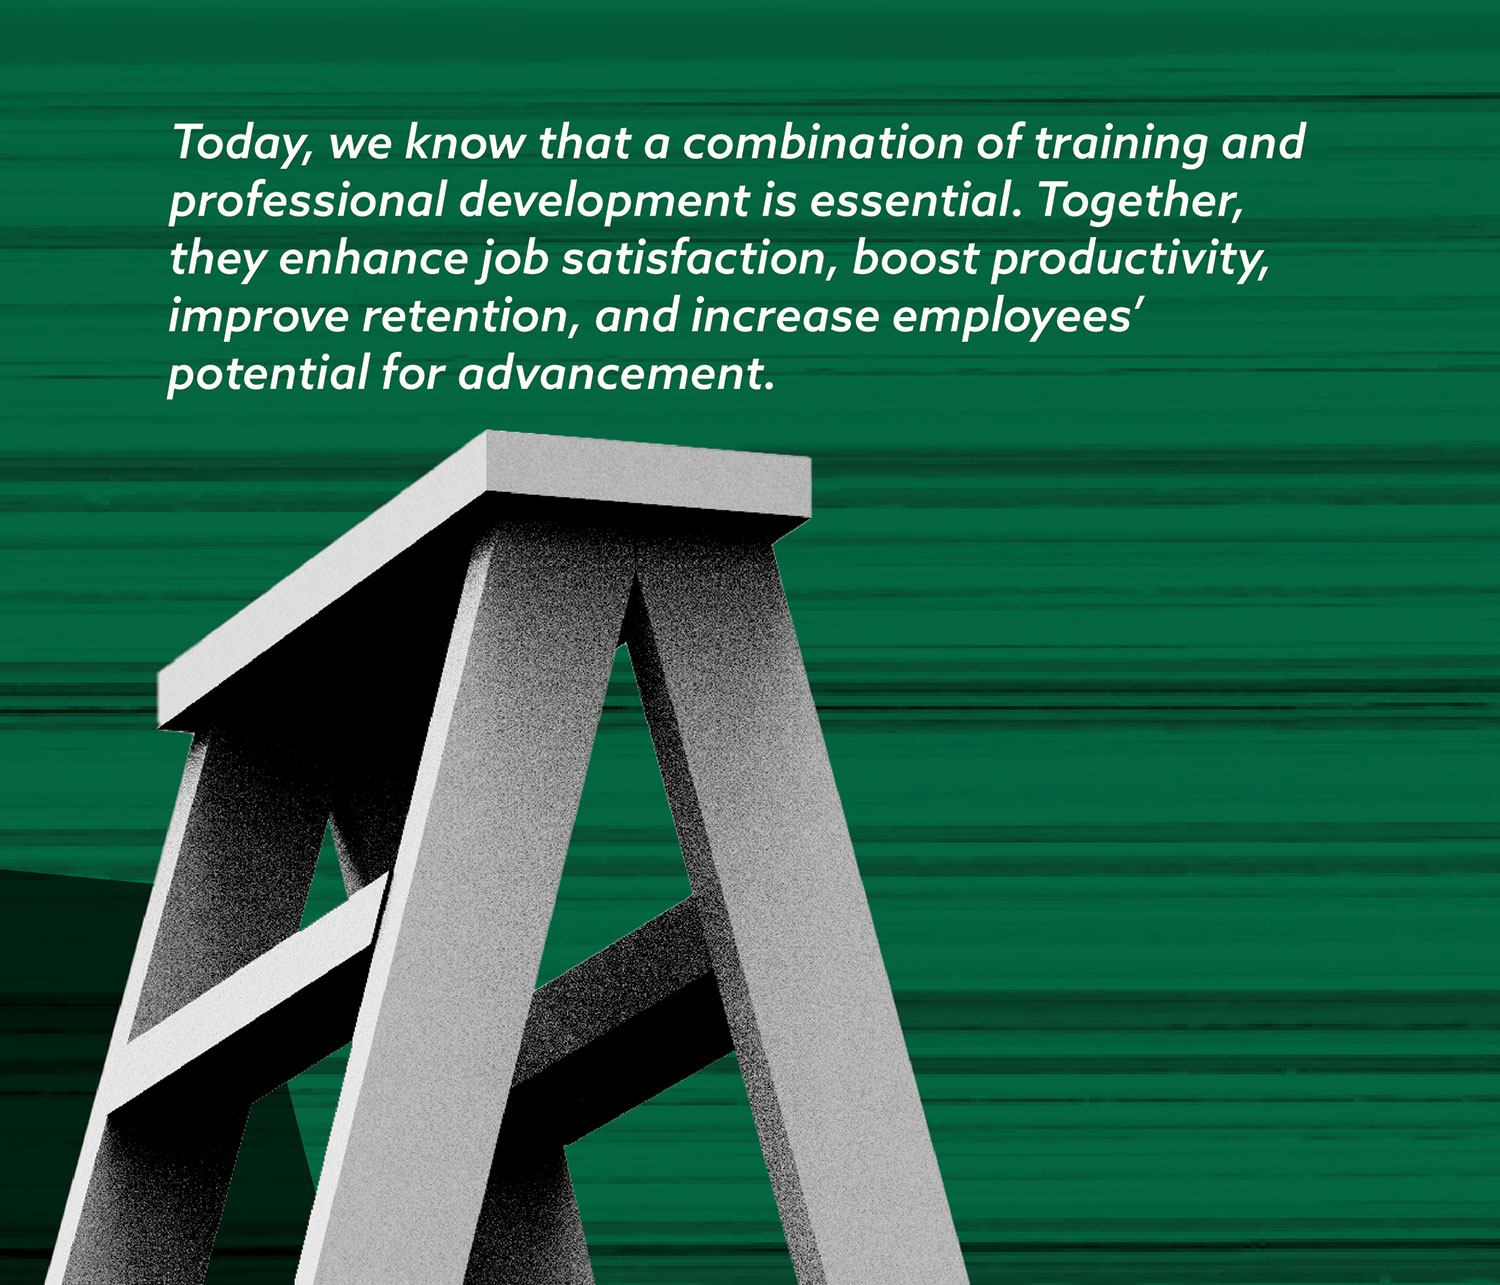 Today, we know that a combination of training and professional development is essential. Together, they enhance job satisfaction, boost productivity, improve retention, and increase employees' potential for advancement.